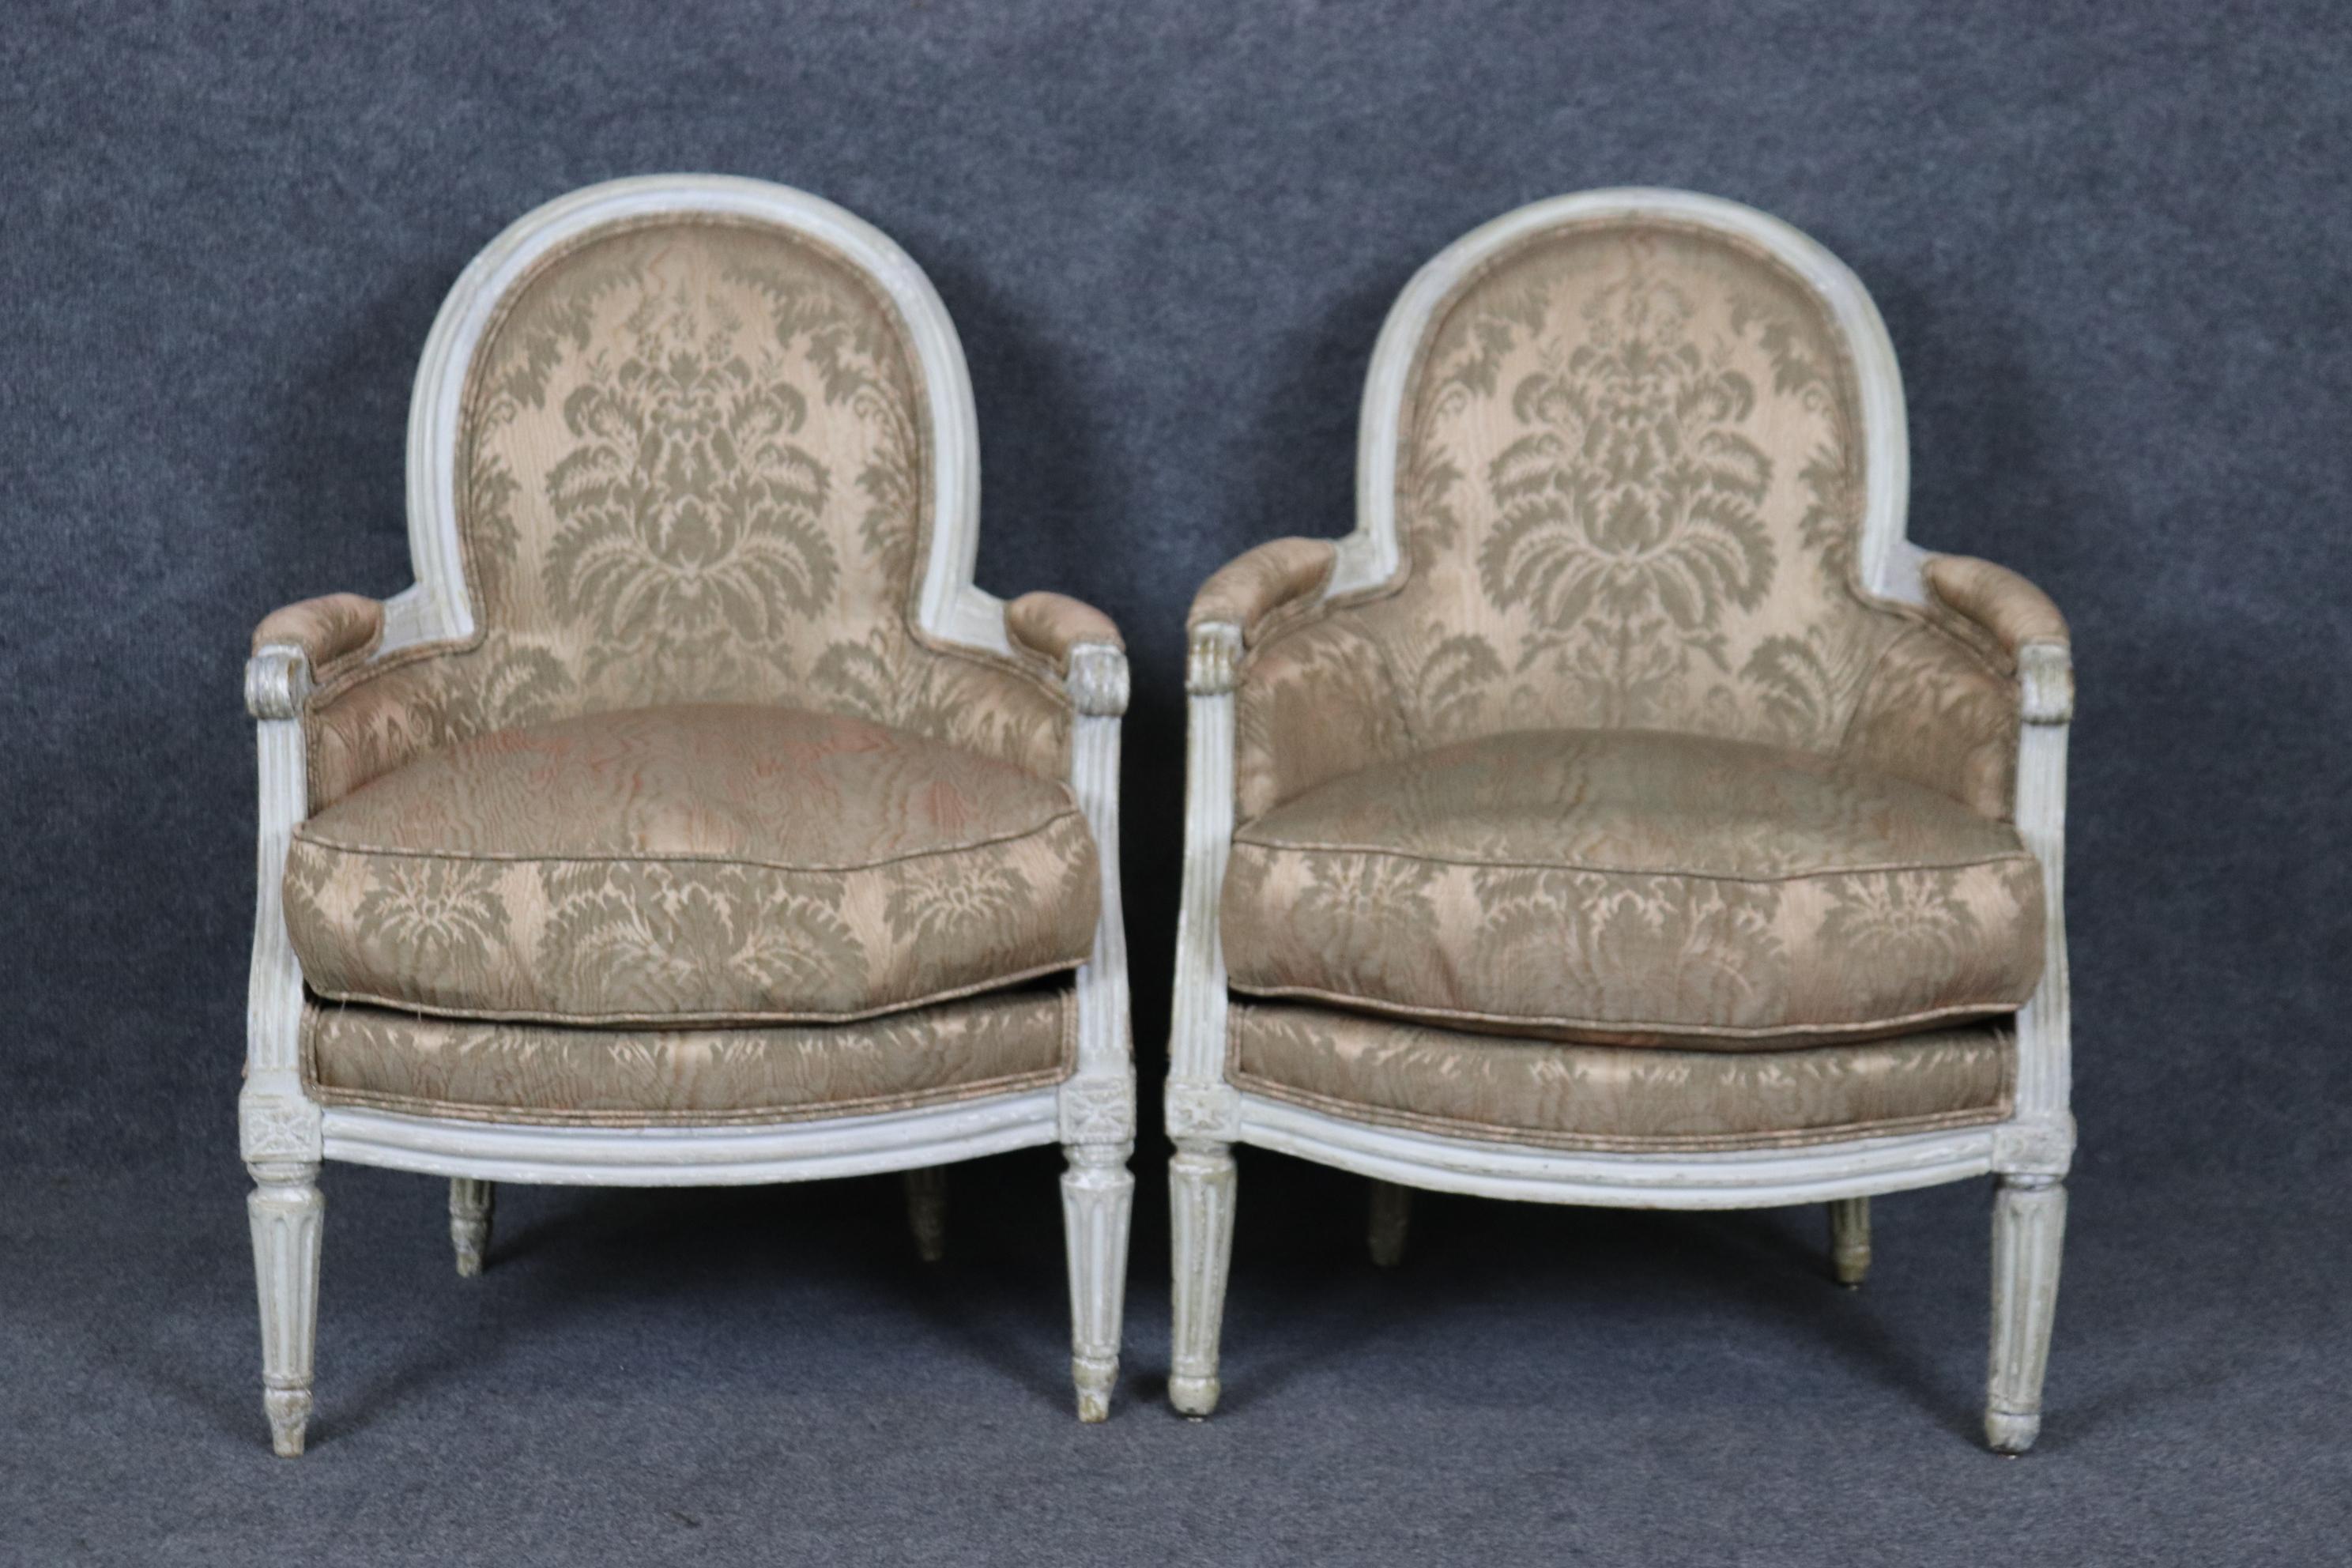 This is a very, very rare size of bergere chairs! These chairs are only 32 tall x 24 wide x 23 deep and have a normal seat height of 19 inches. They are perfect for a bedroom or boudoir or even a hallway or foyer near a center table with a fine vase